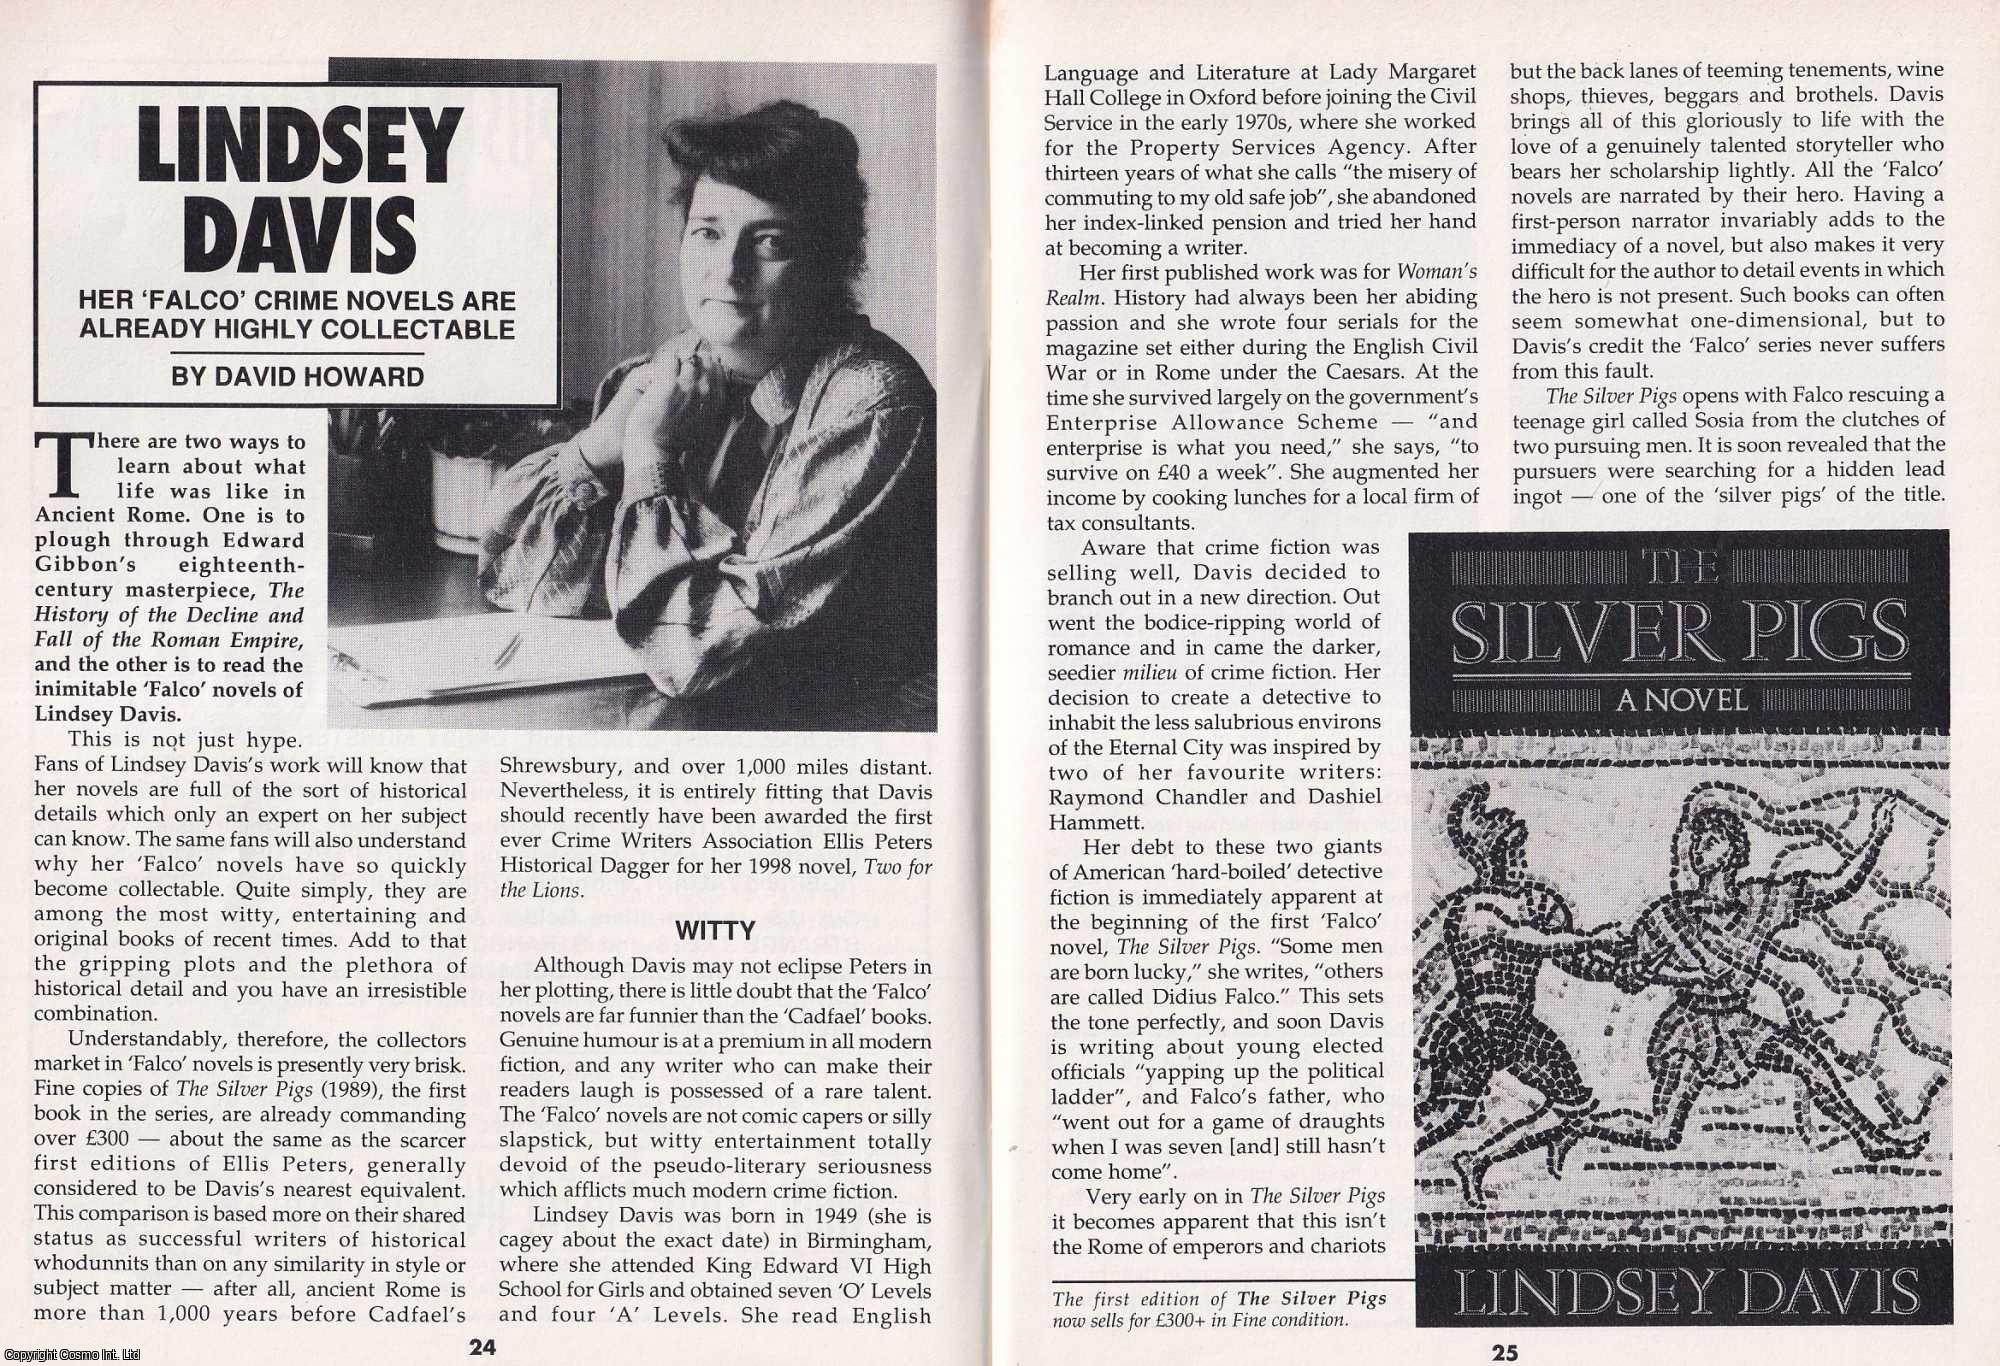 David Howard - Lindsey Davis, novelist. This is an original article separated from an issue of The Book & Magazine Collector publication, 1999.